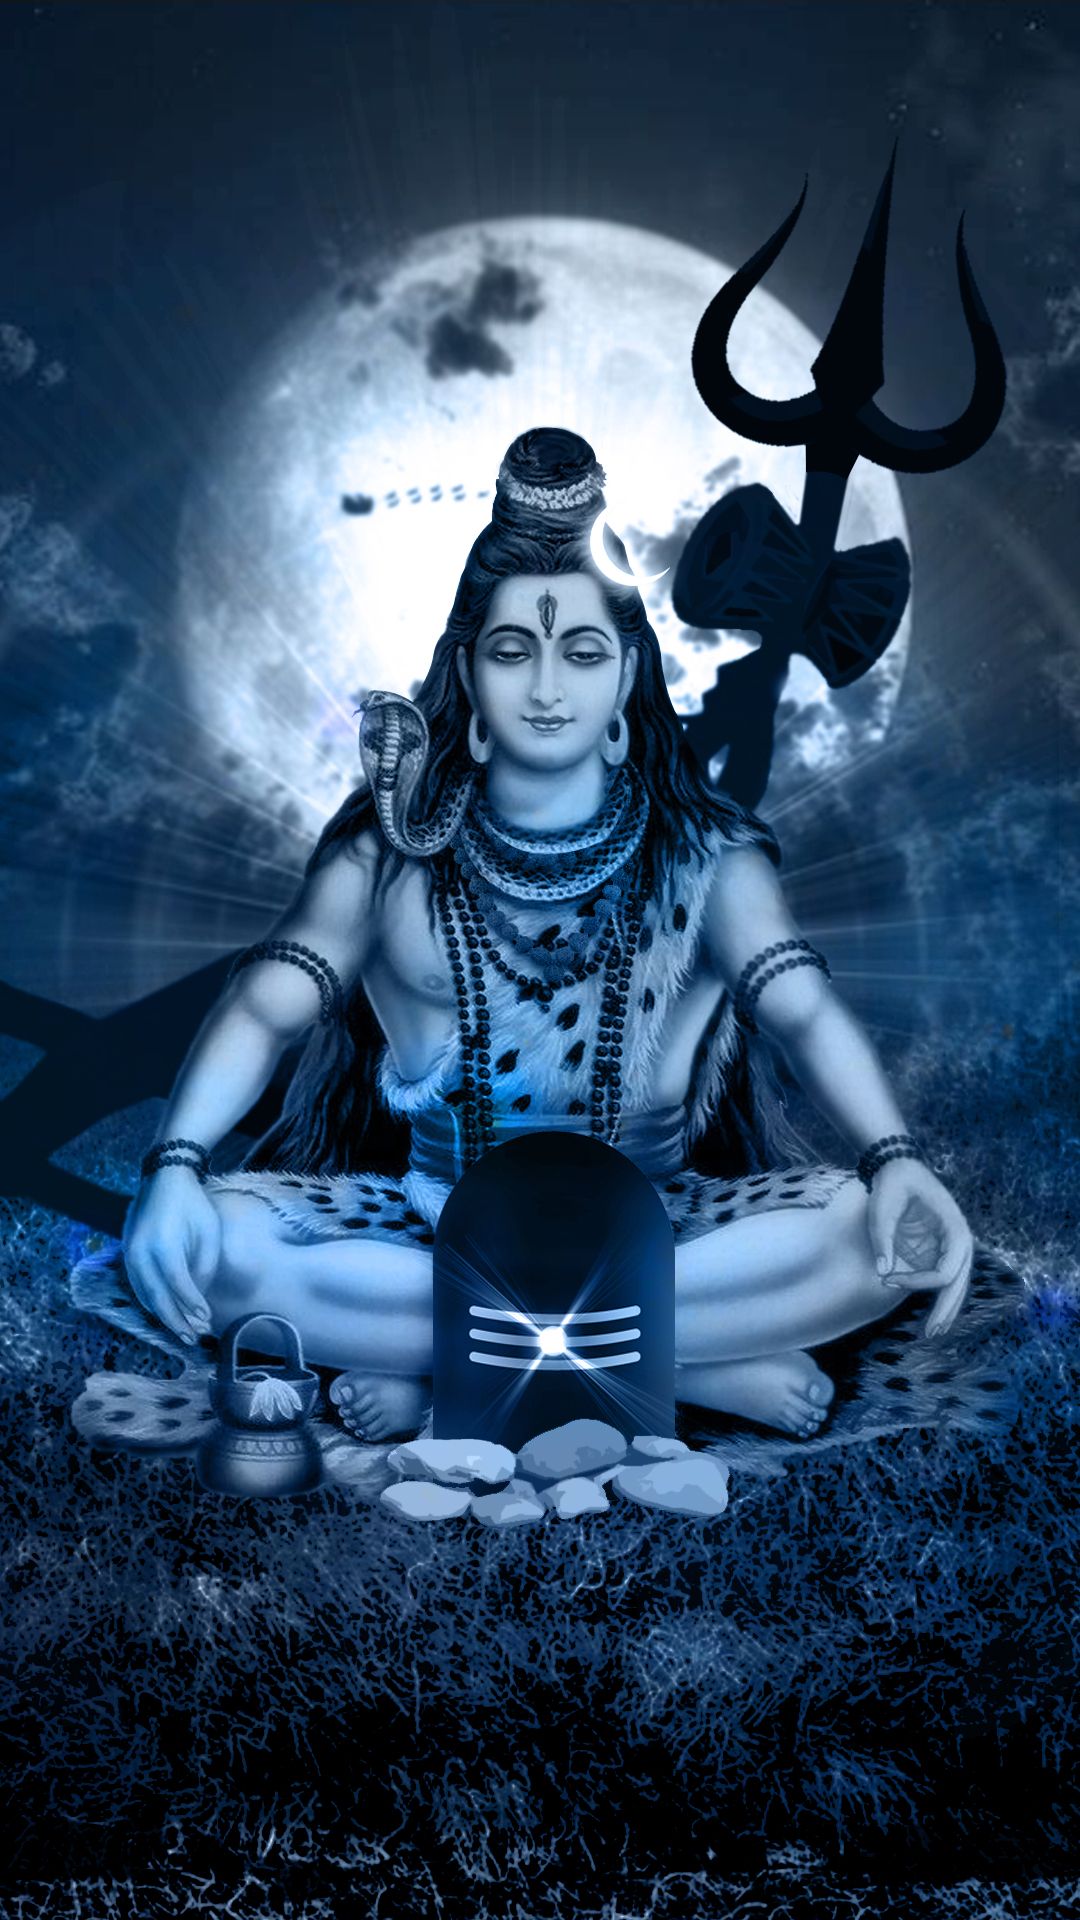 Lord Shiva 3D Android Wallpapers - Wallpaper Cave